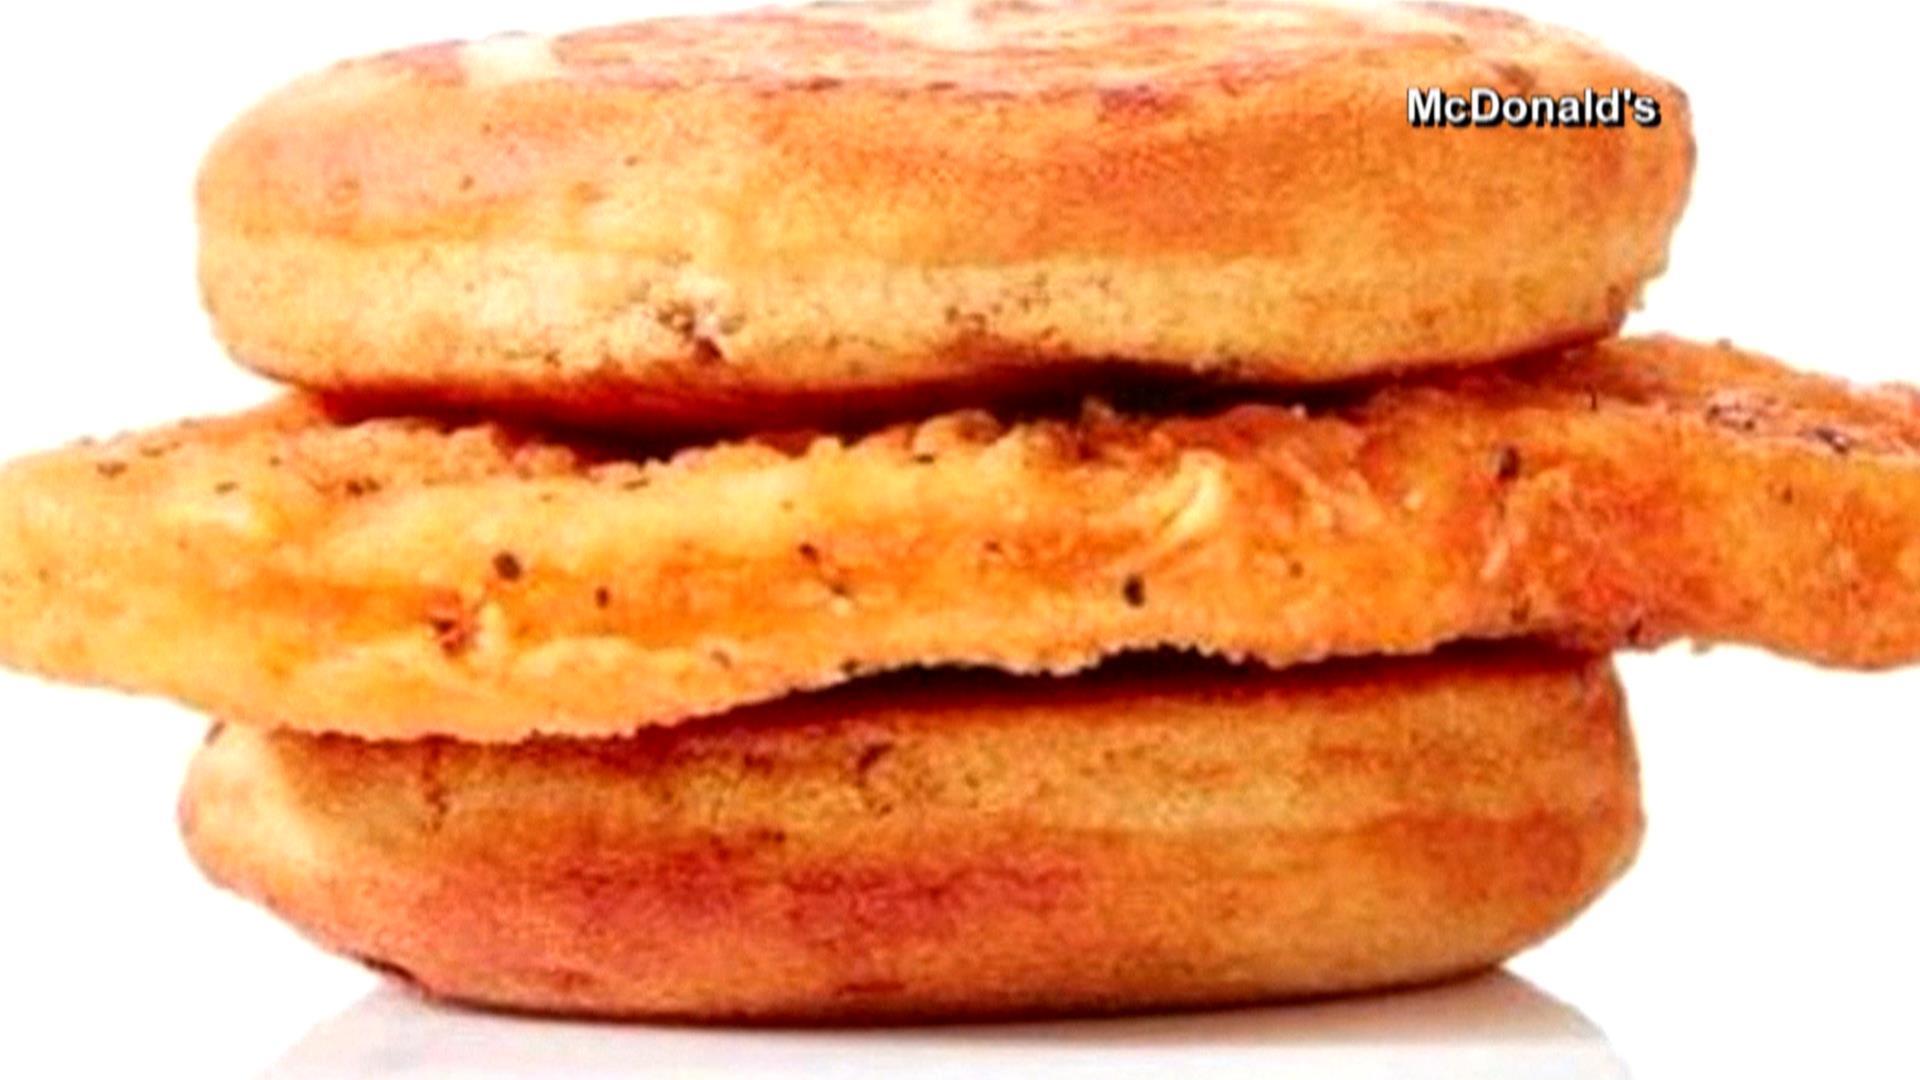 McDonald's Chicken McGriddle, The Syrup Infused Chicken Sandwich